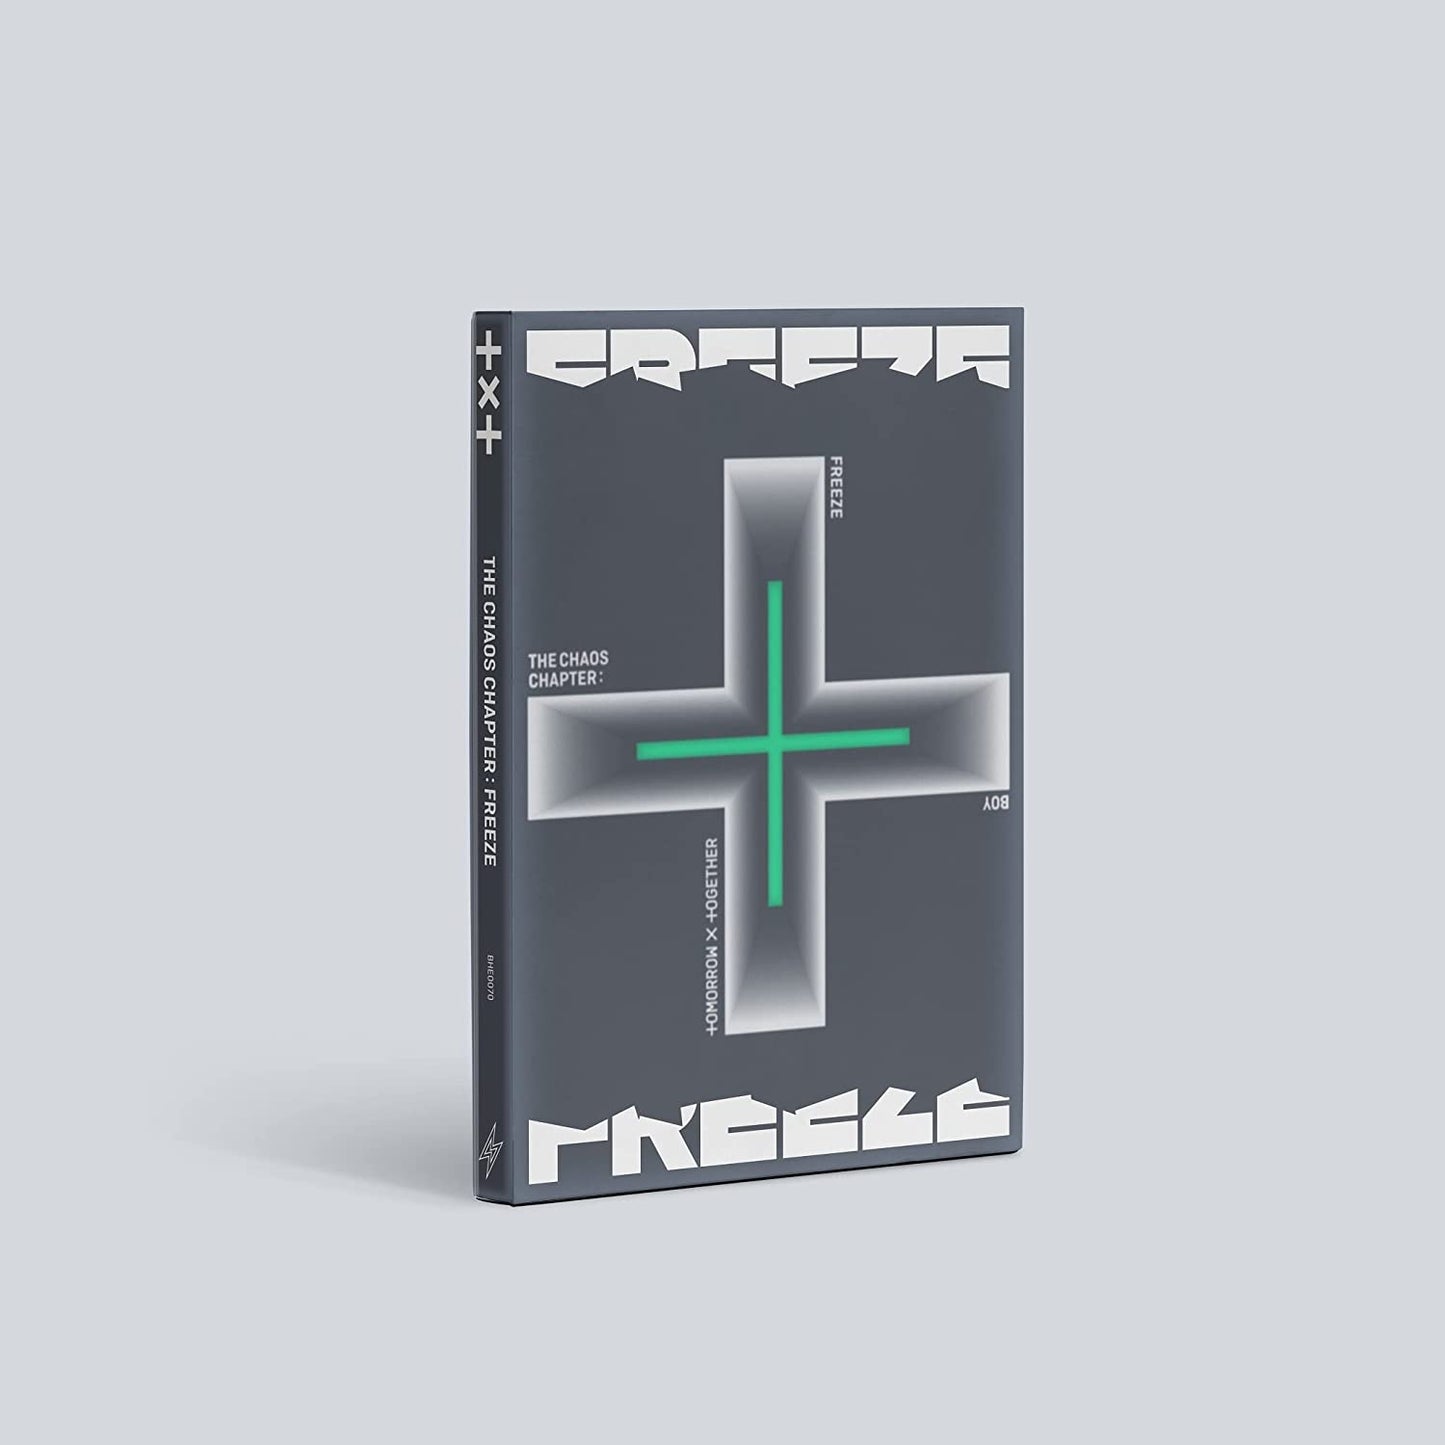 TOMORROW X TOGETHER (TXT) 2ND ALBUM 'THE CHAOS CHAPTER : FREEZE' BOY VERSION COVER